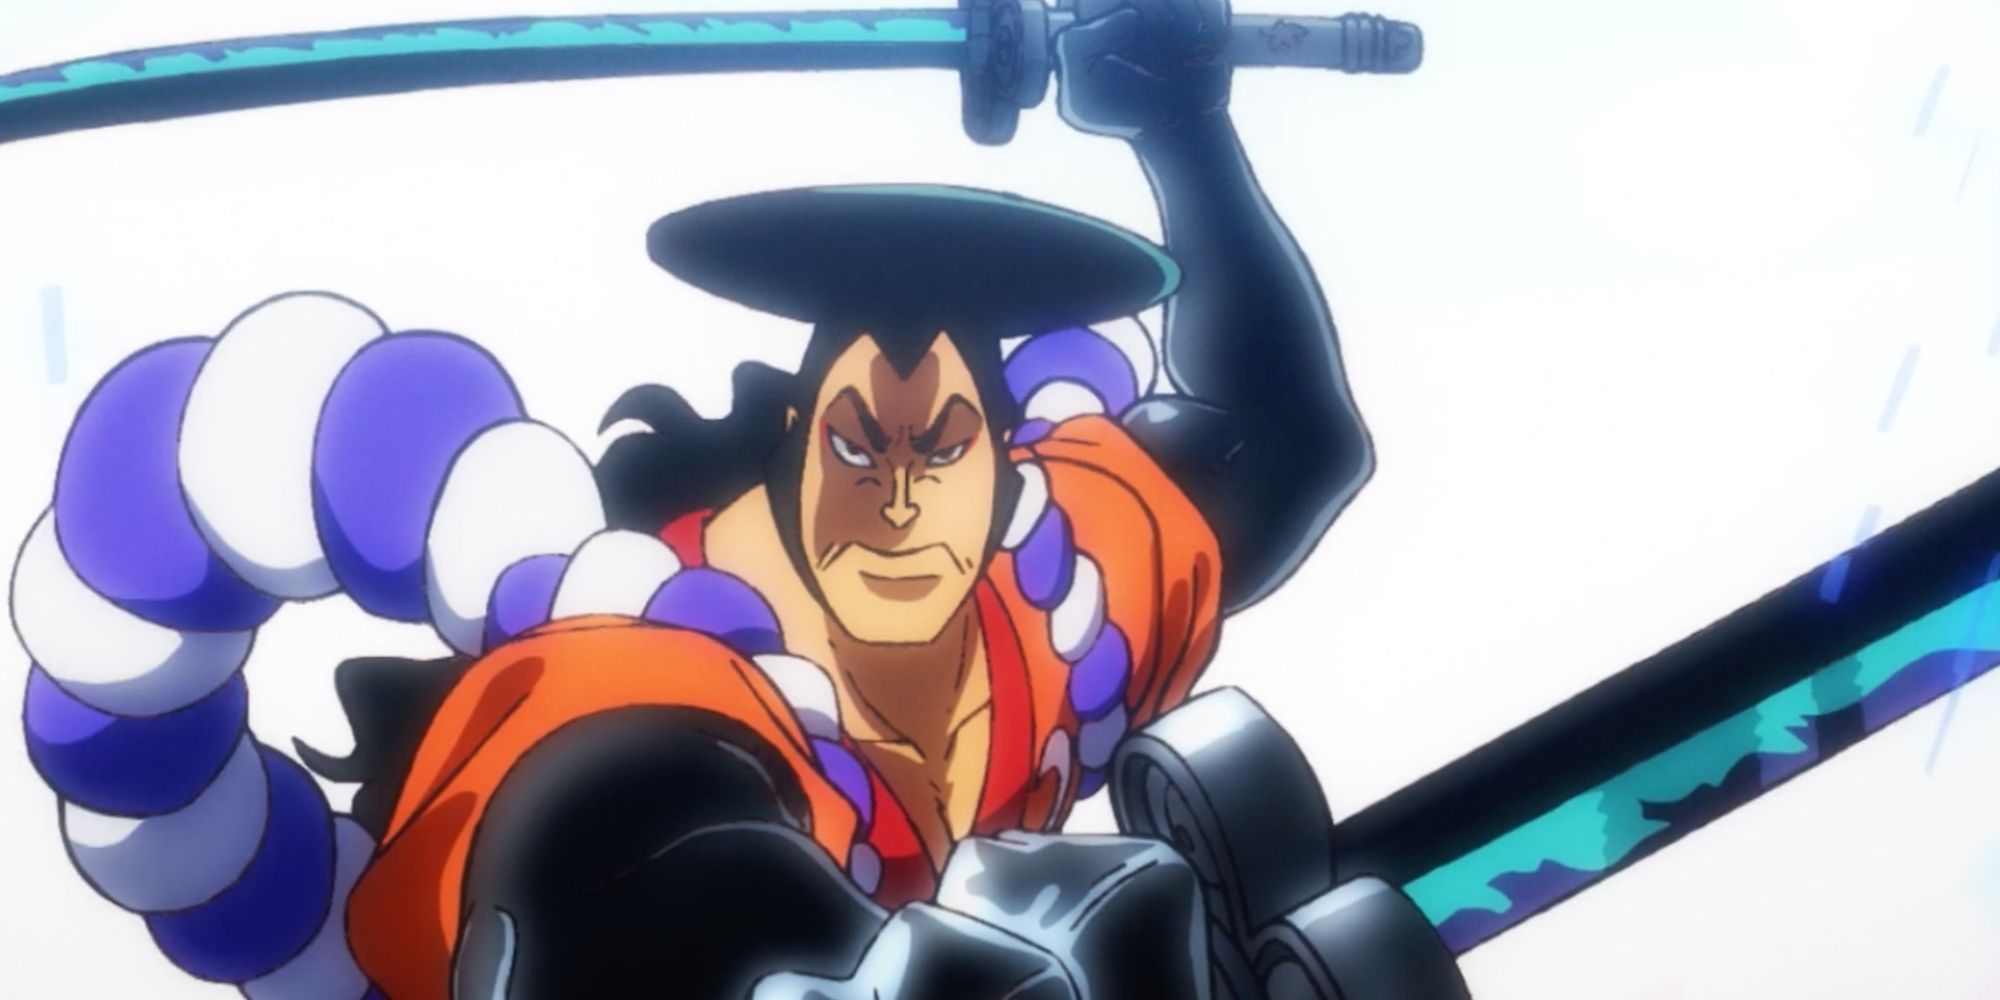 One Piece Kozuki Oden using his two-sword style